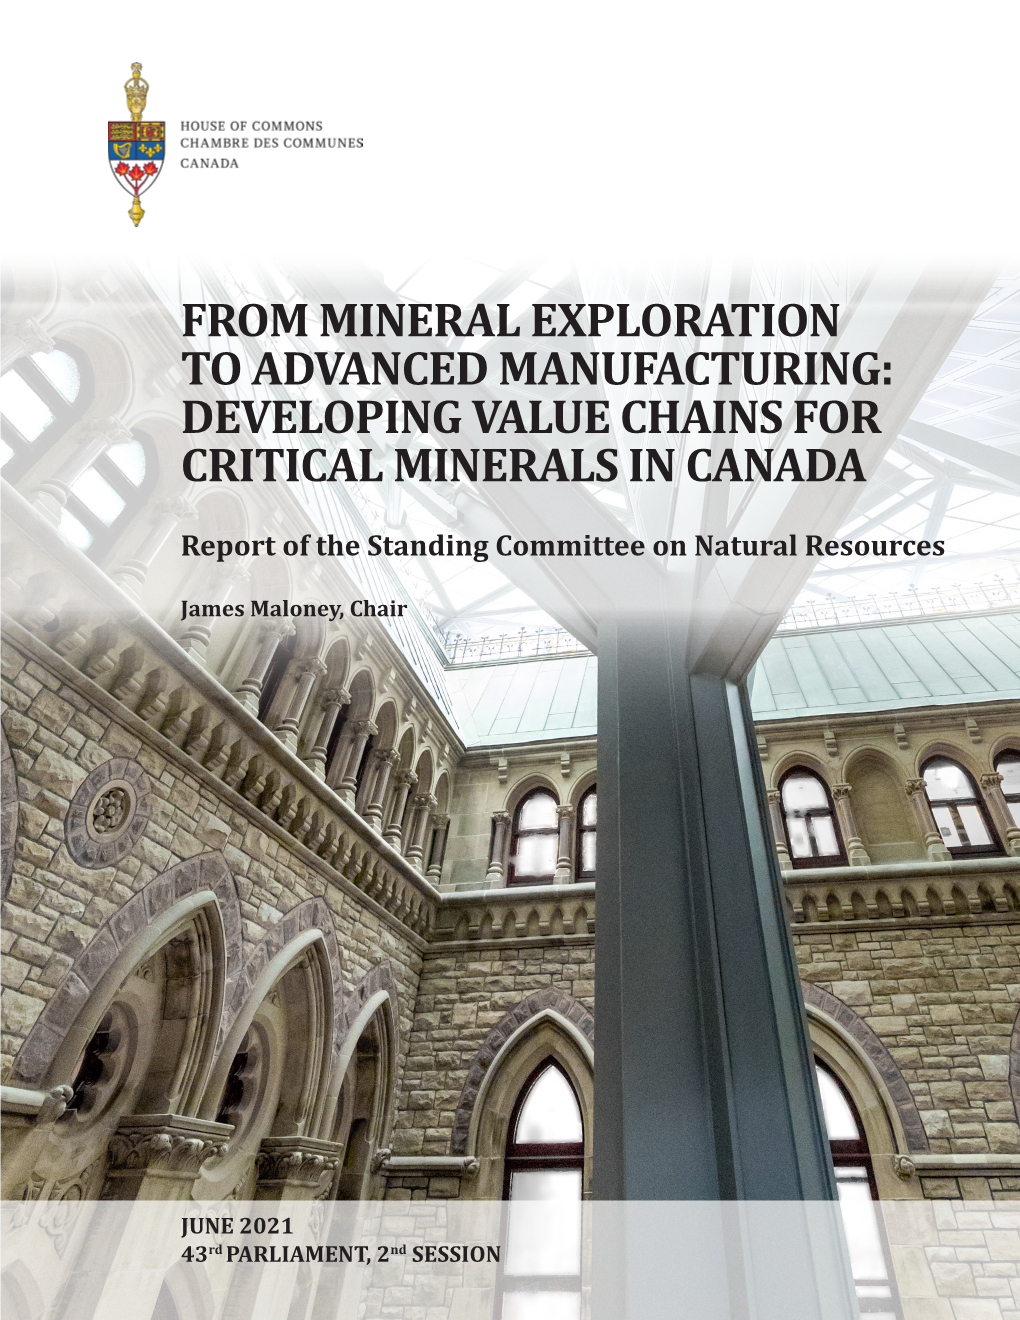 Developing Value Chains for Critical Minerals in Canada